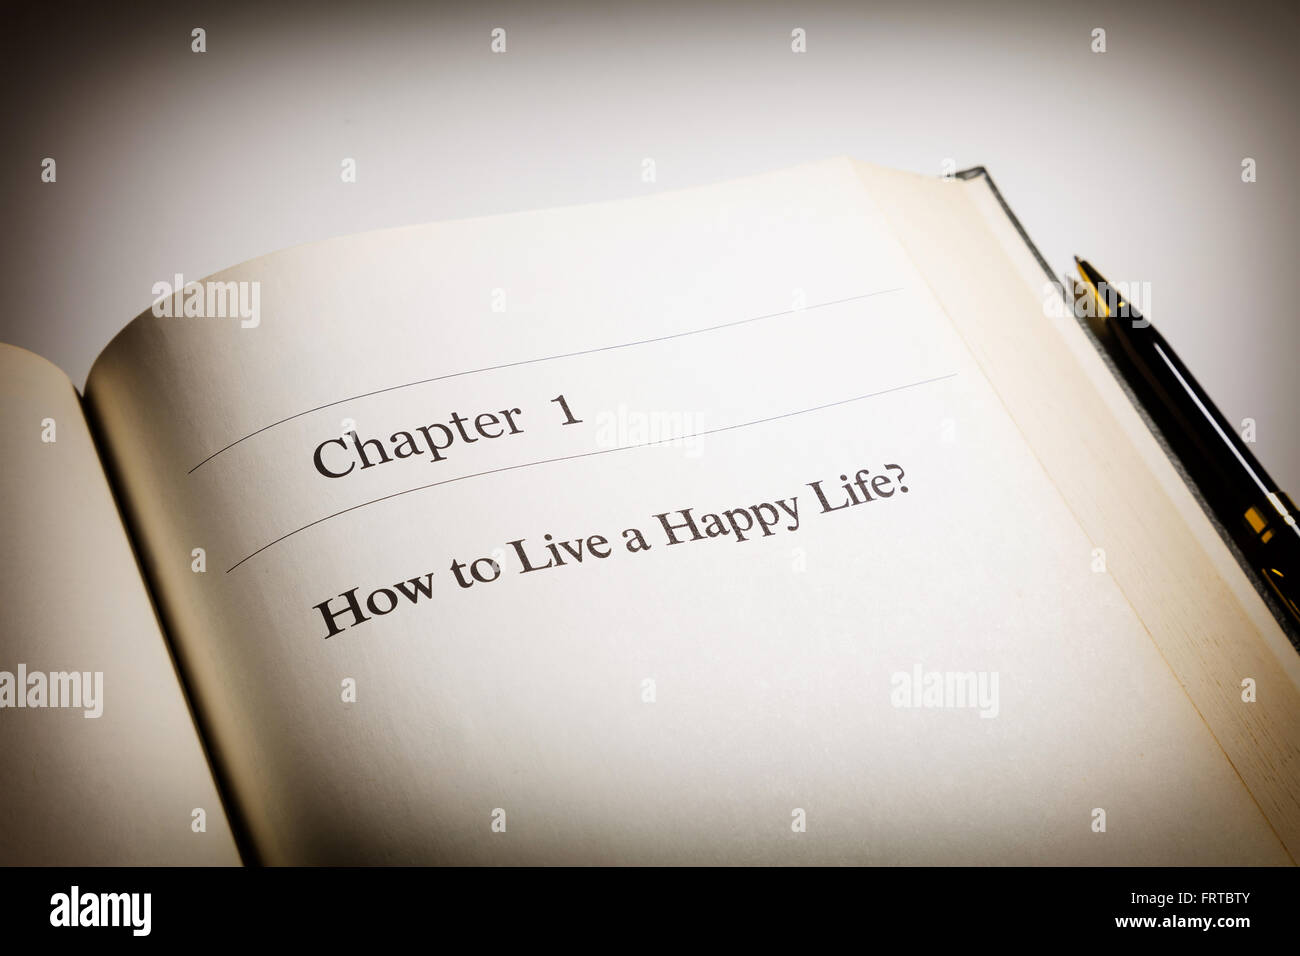 how to live a happy life?  life  philosophy. fake book. Stock Photo